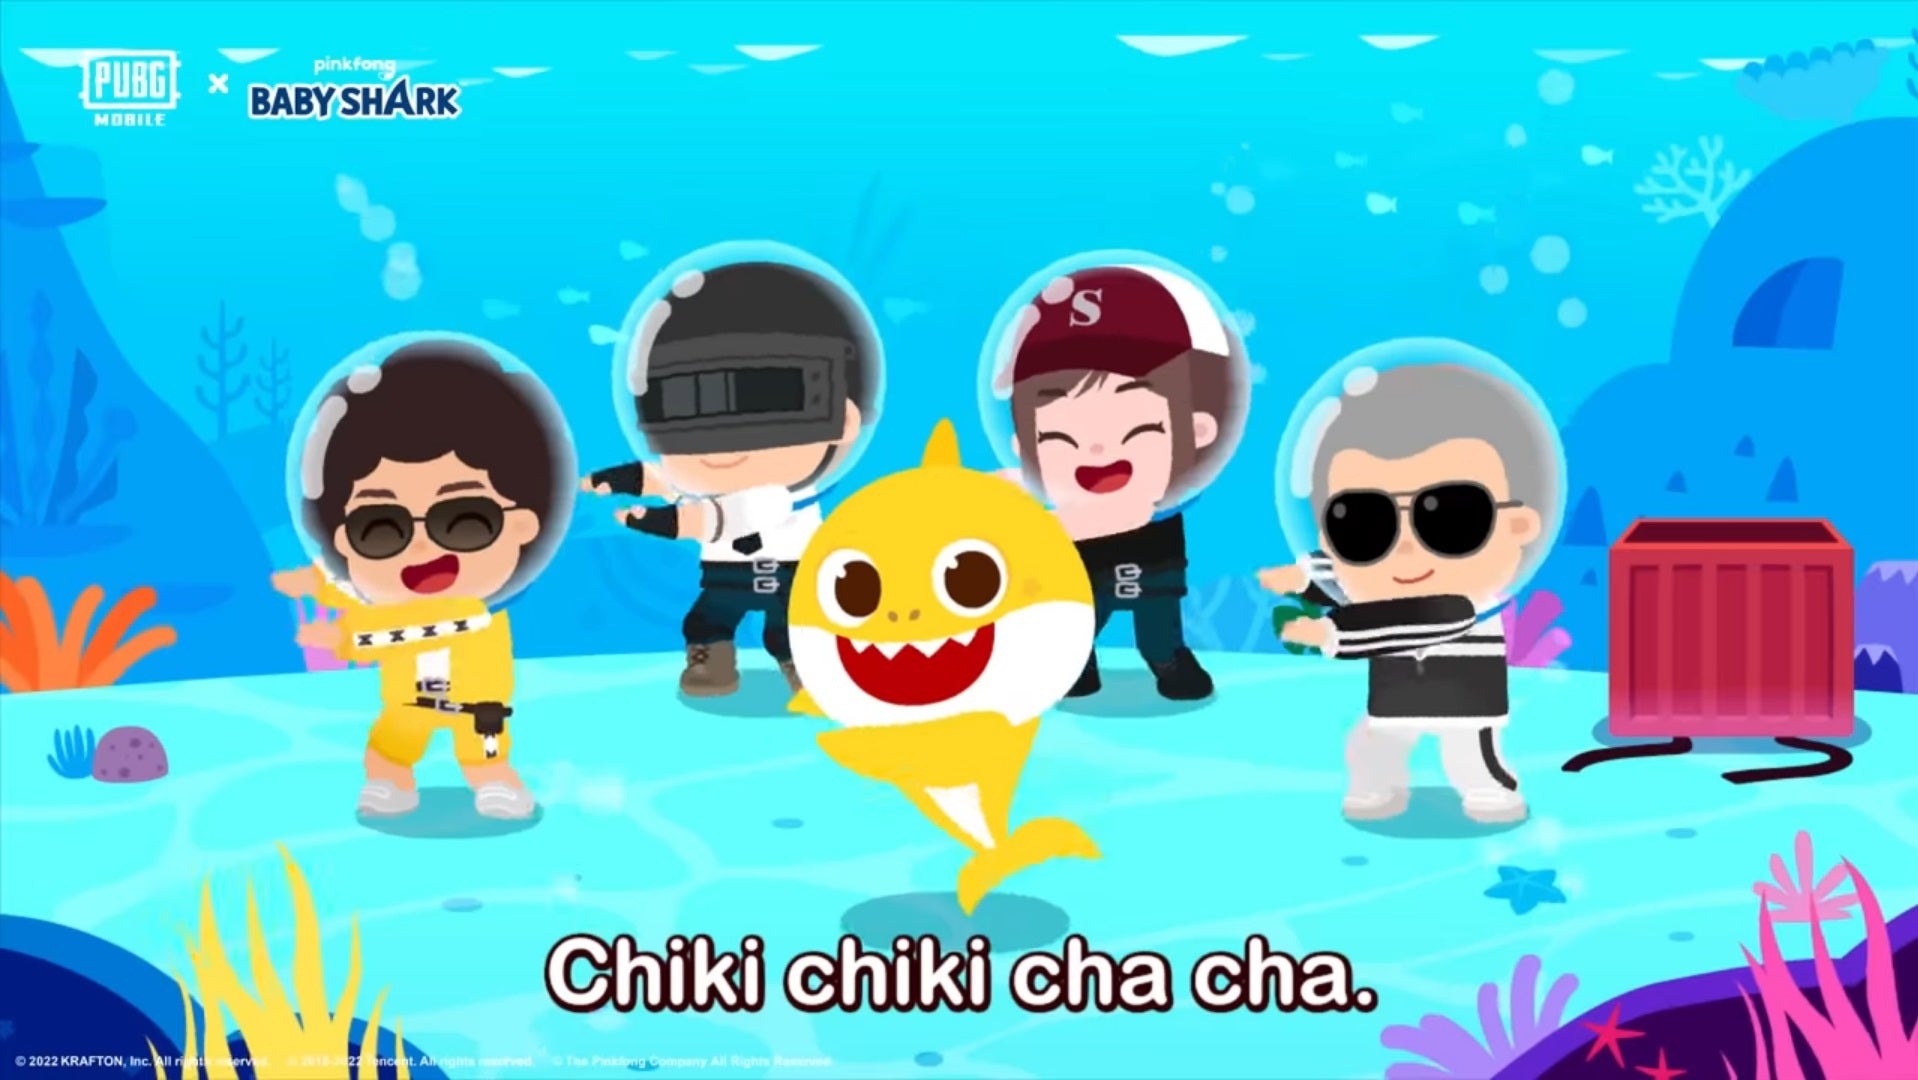 A screenshot from the PUBG x Baby Shark crossover